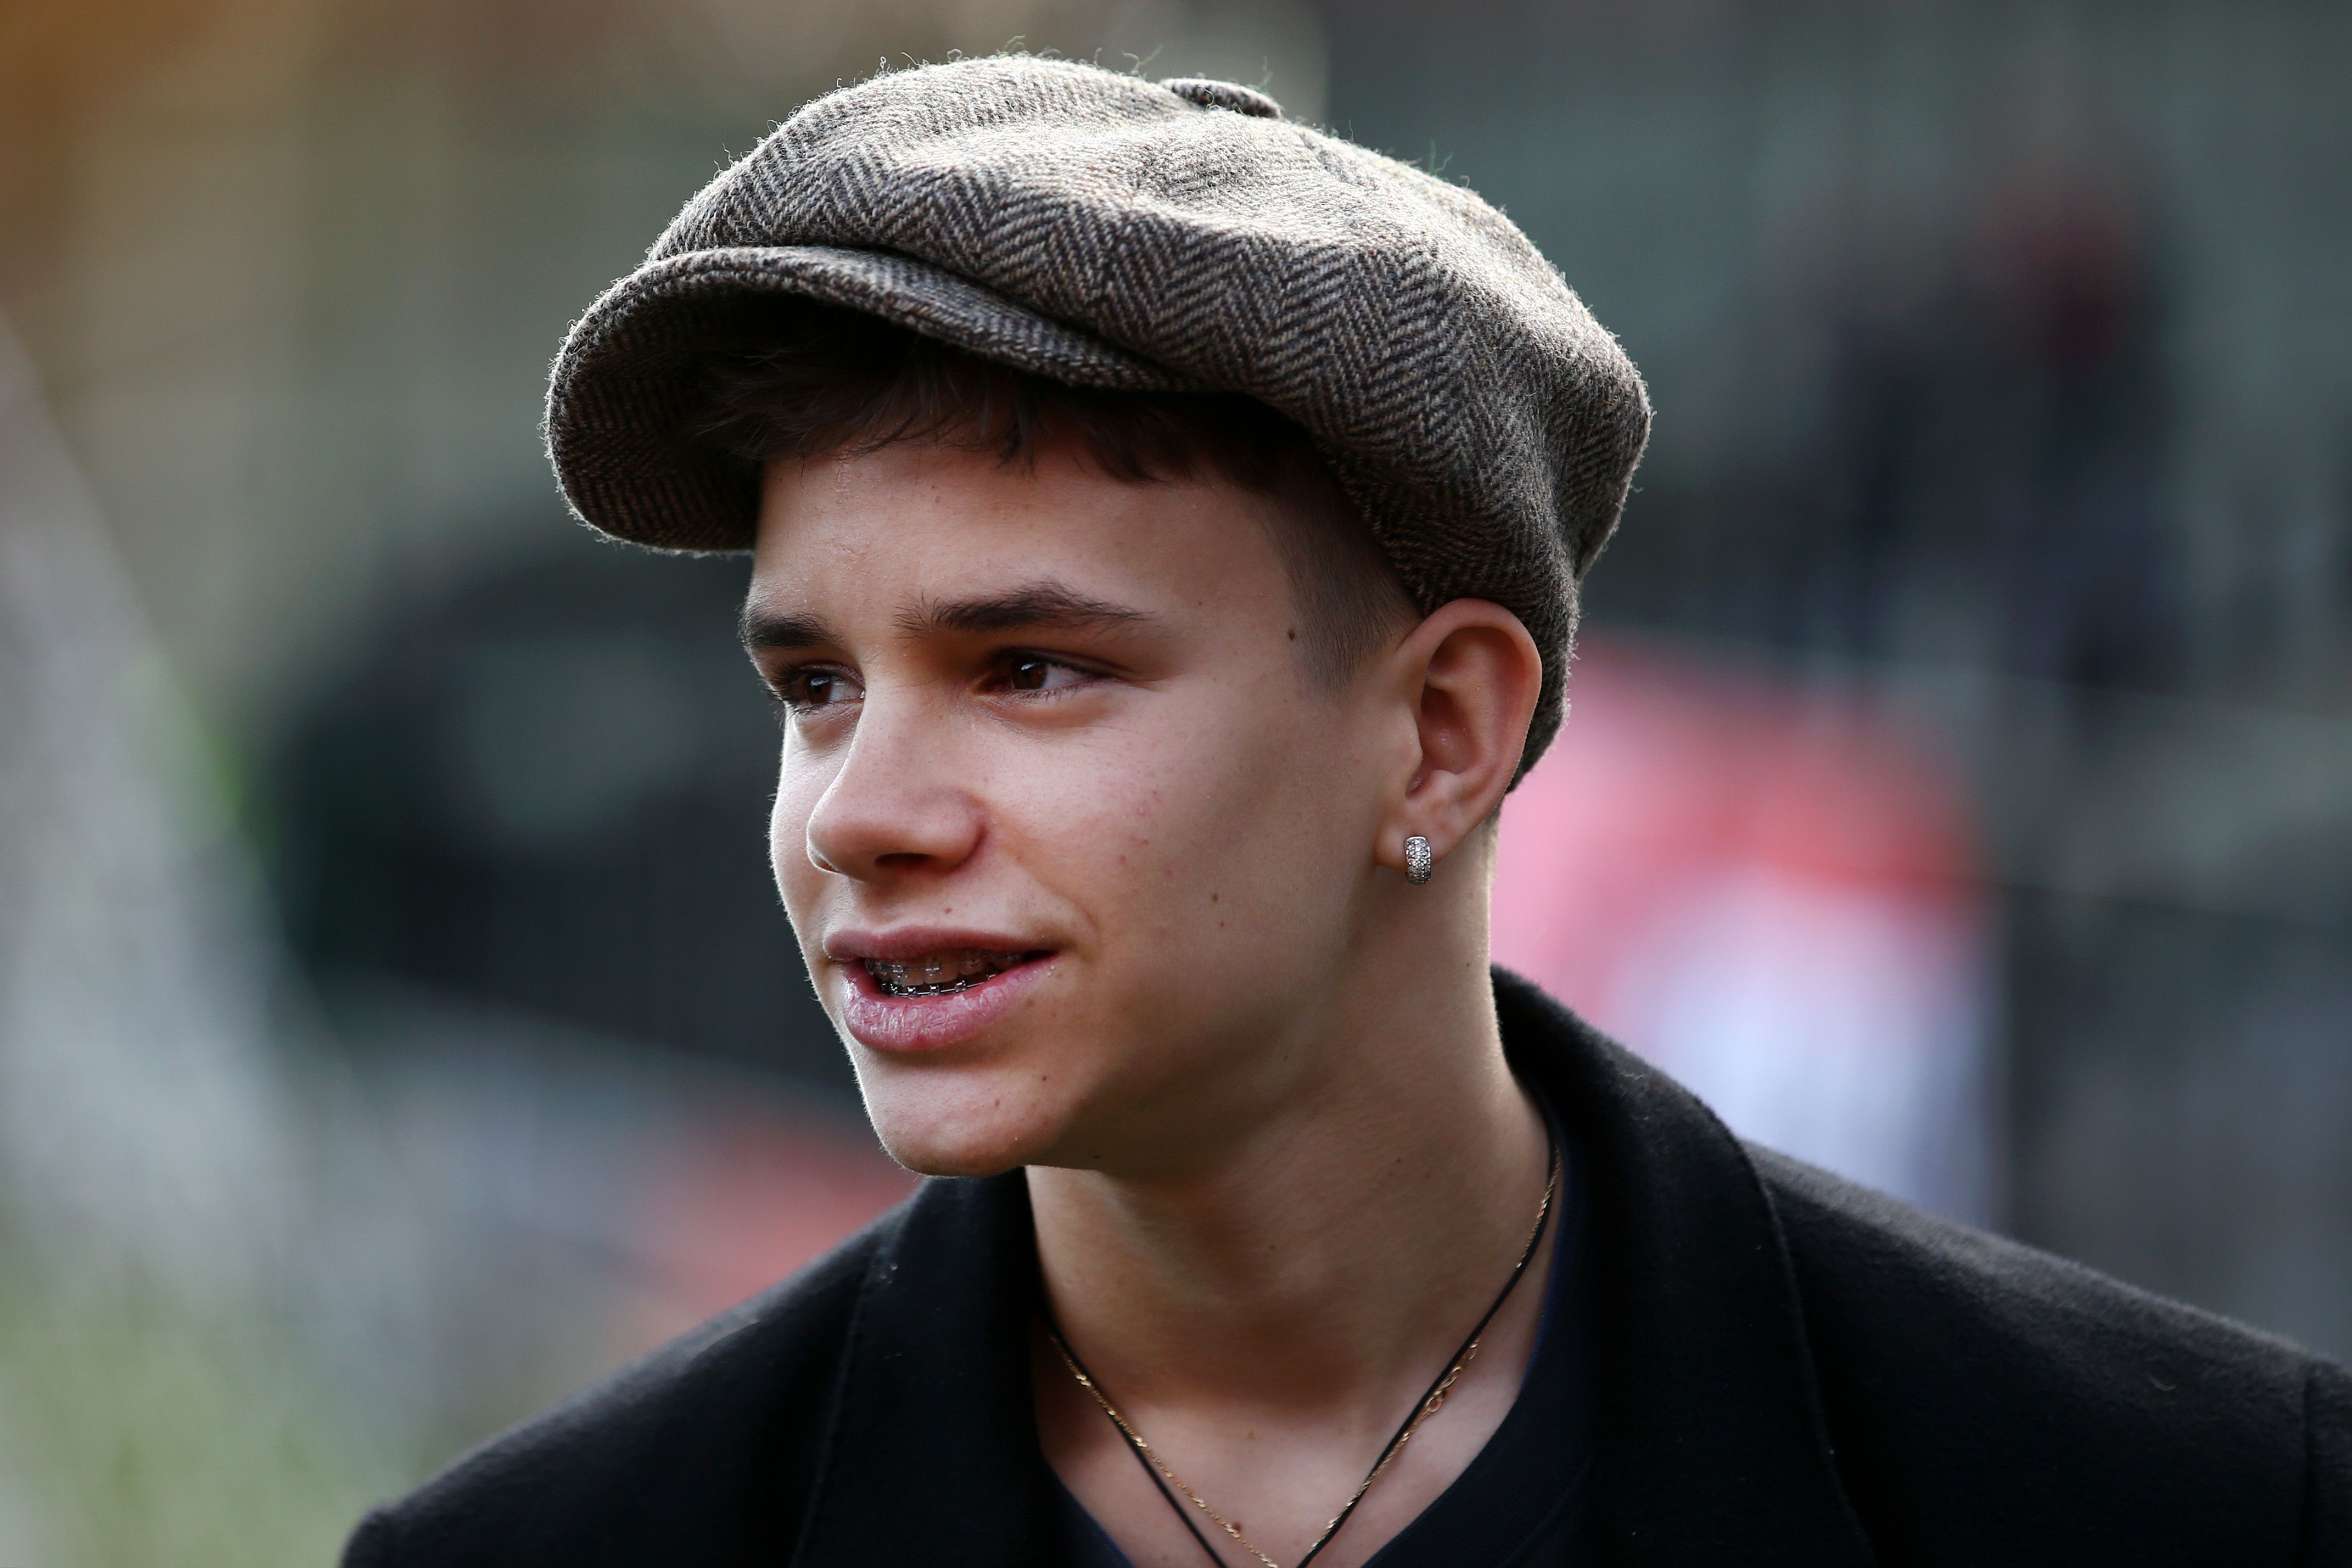 Romeo James Beckham during the Vanarama National League match between Salford City and Dover Athletic at Peninsula Stadium on February 16, 2019, in Salford, England. | Source: Getty Images